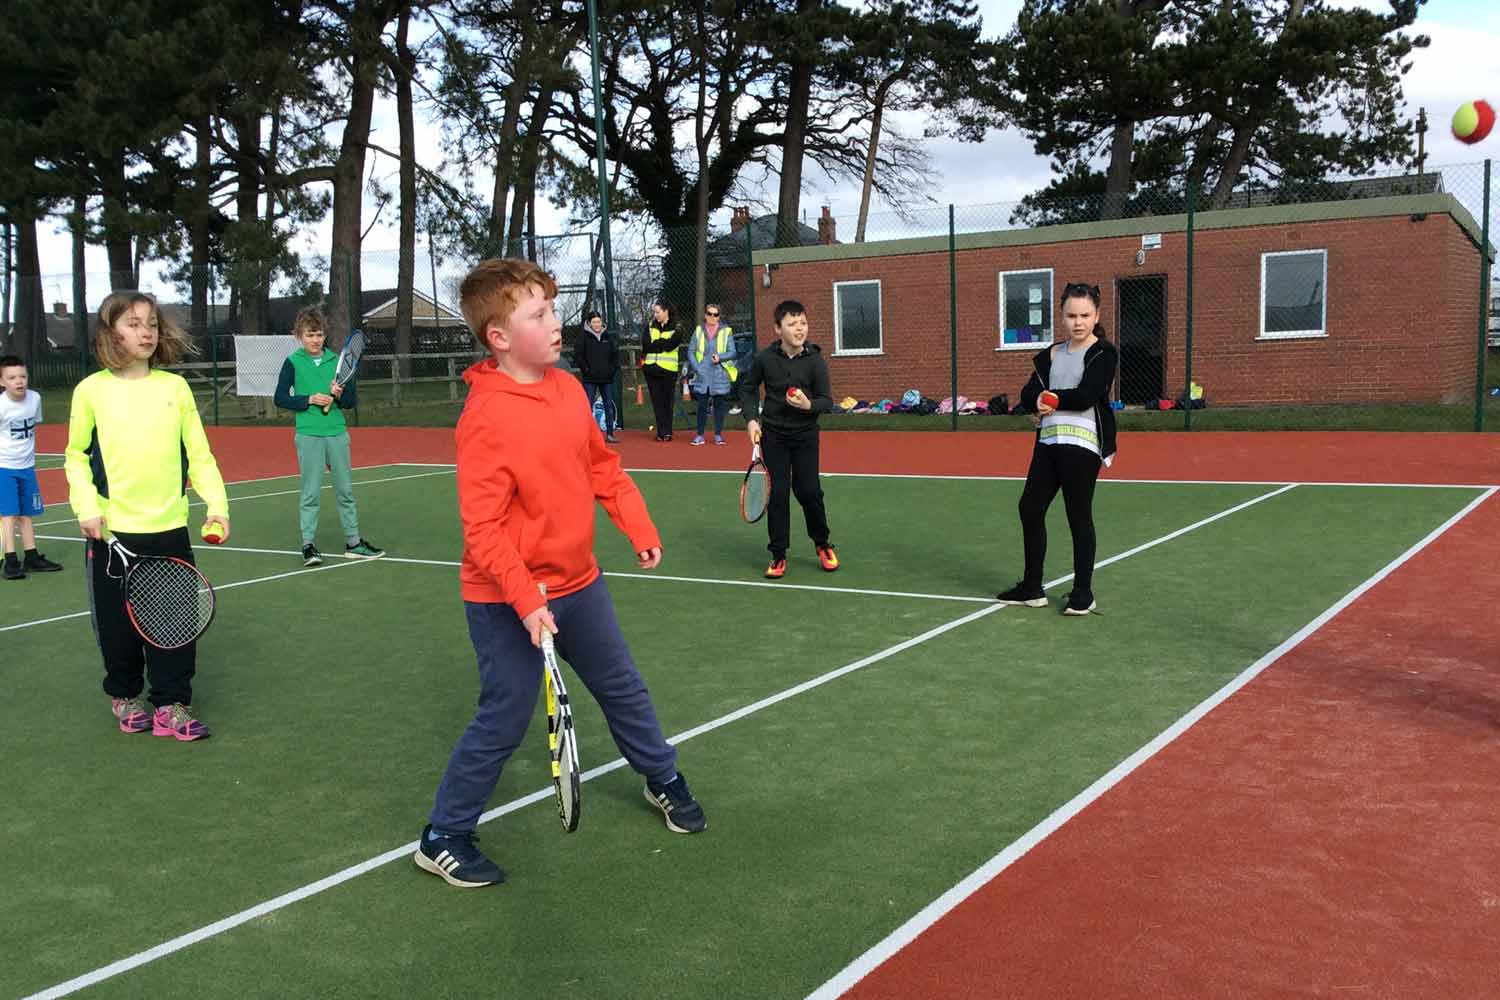 Children in years 4,5 & 6 got the chance to try their hand at tennis thanks to a kind invitation by Starbeck Tennis Club